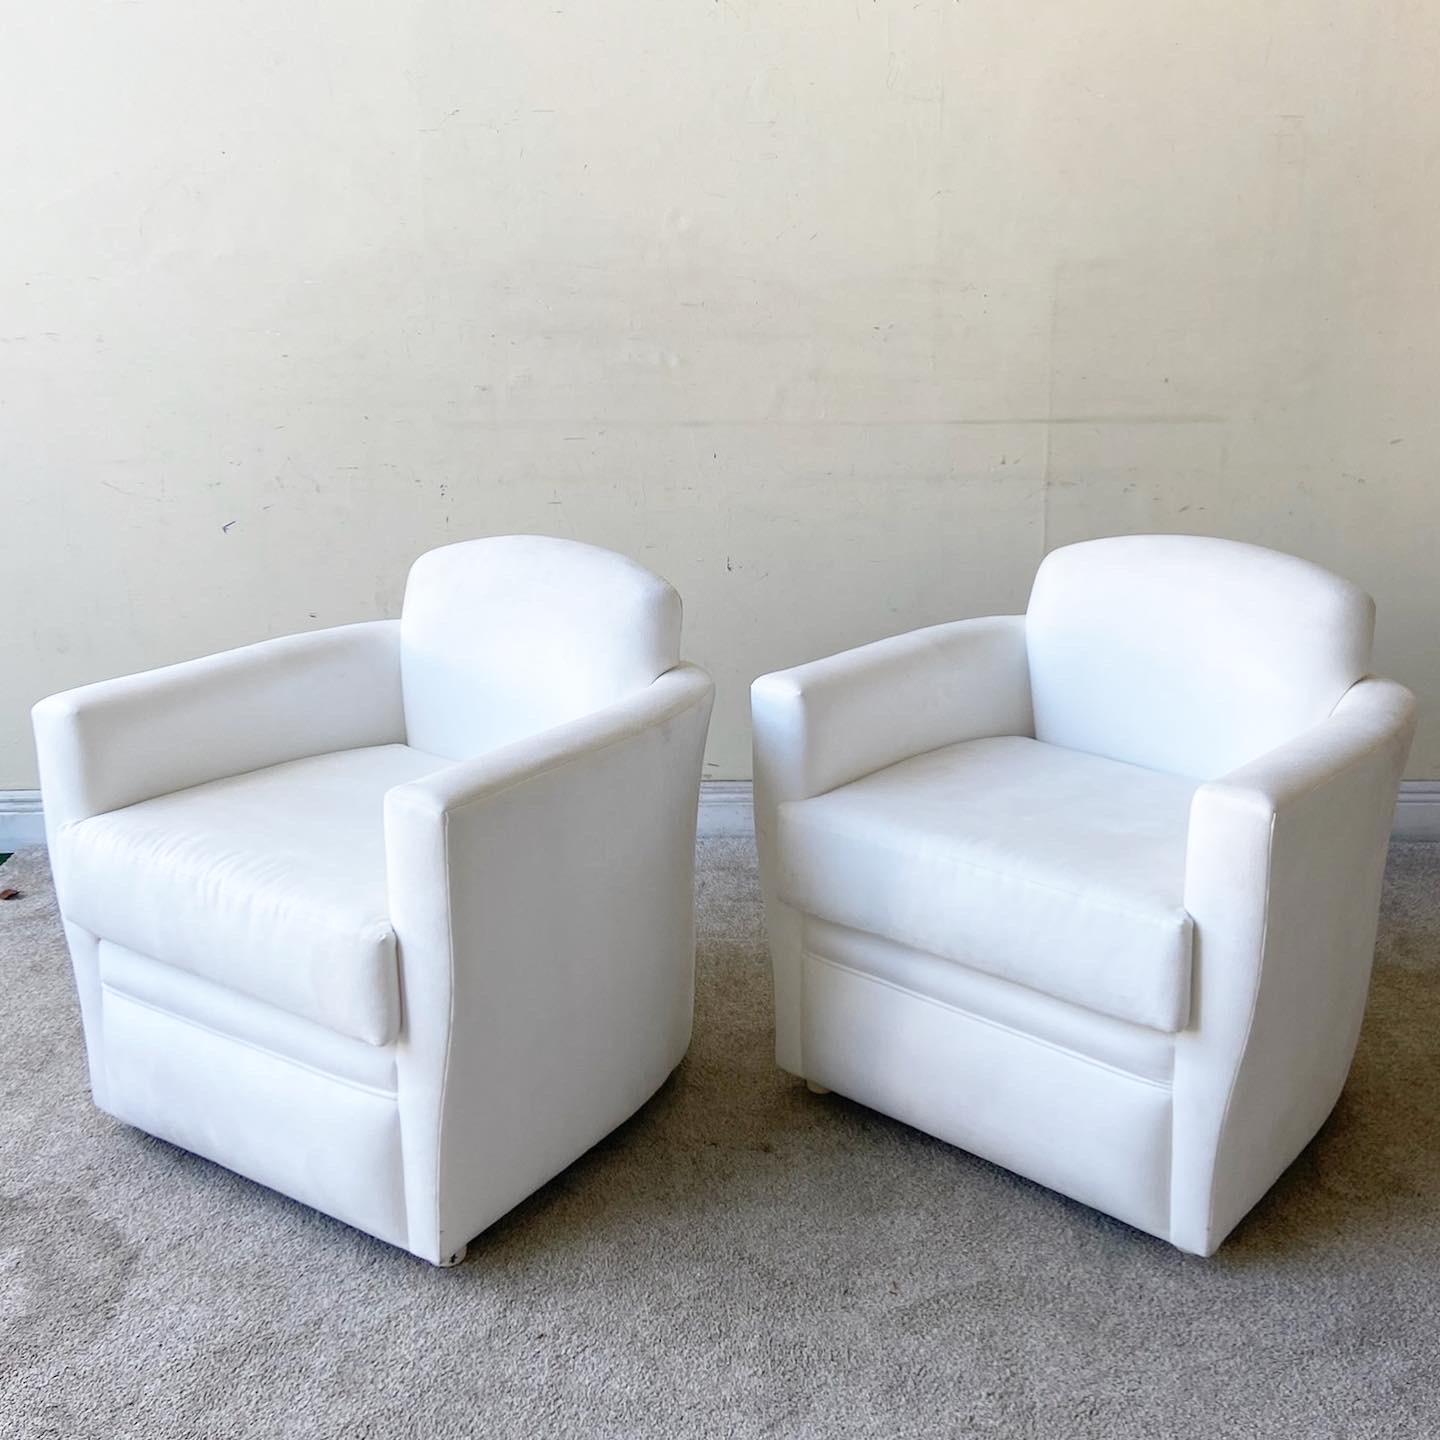 Amazing pair of vintage Postmodern lounge chairs. Features a white micro suede upholstery with matching pillows.
